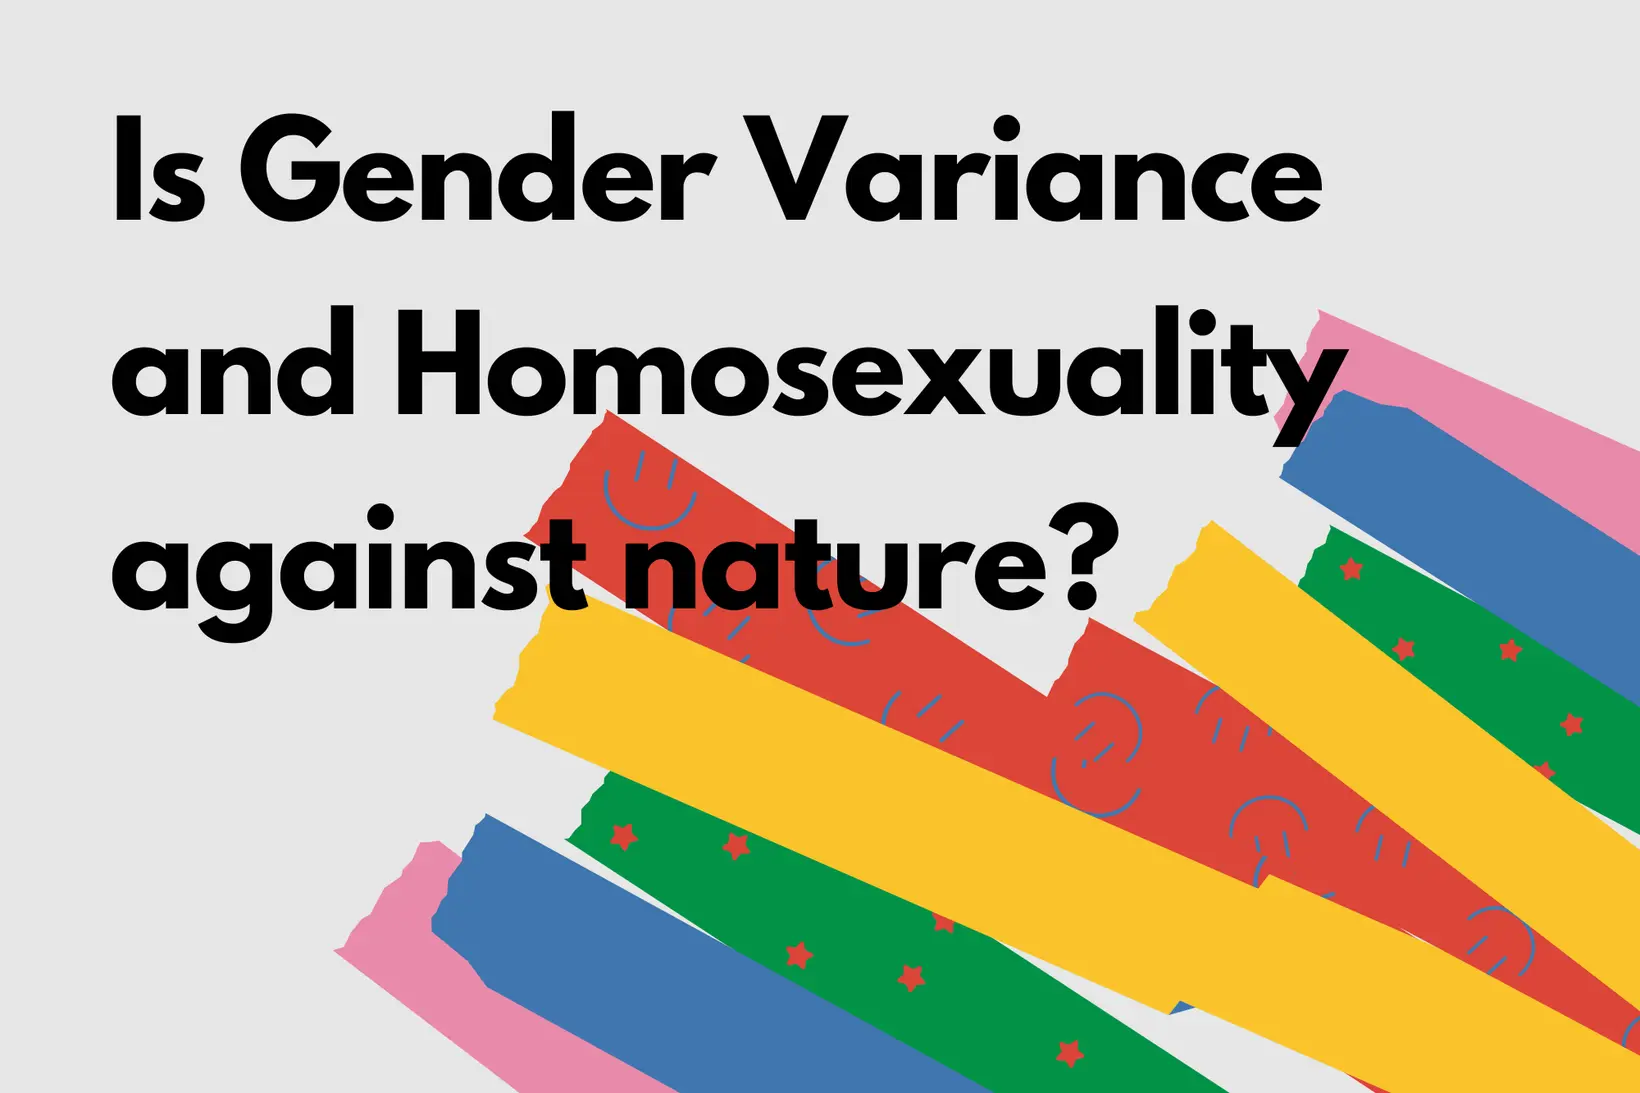 Is Gender Variance and Homosexuality against nature?